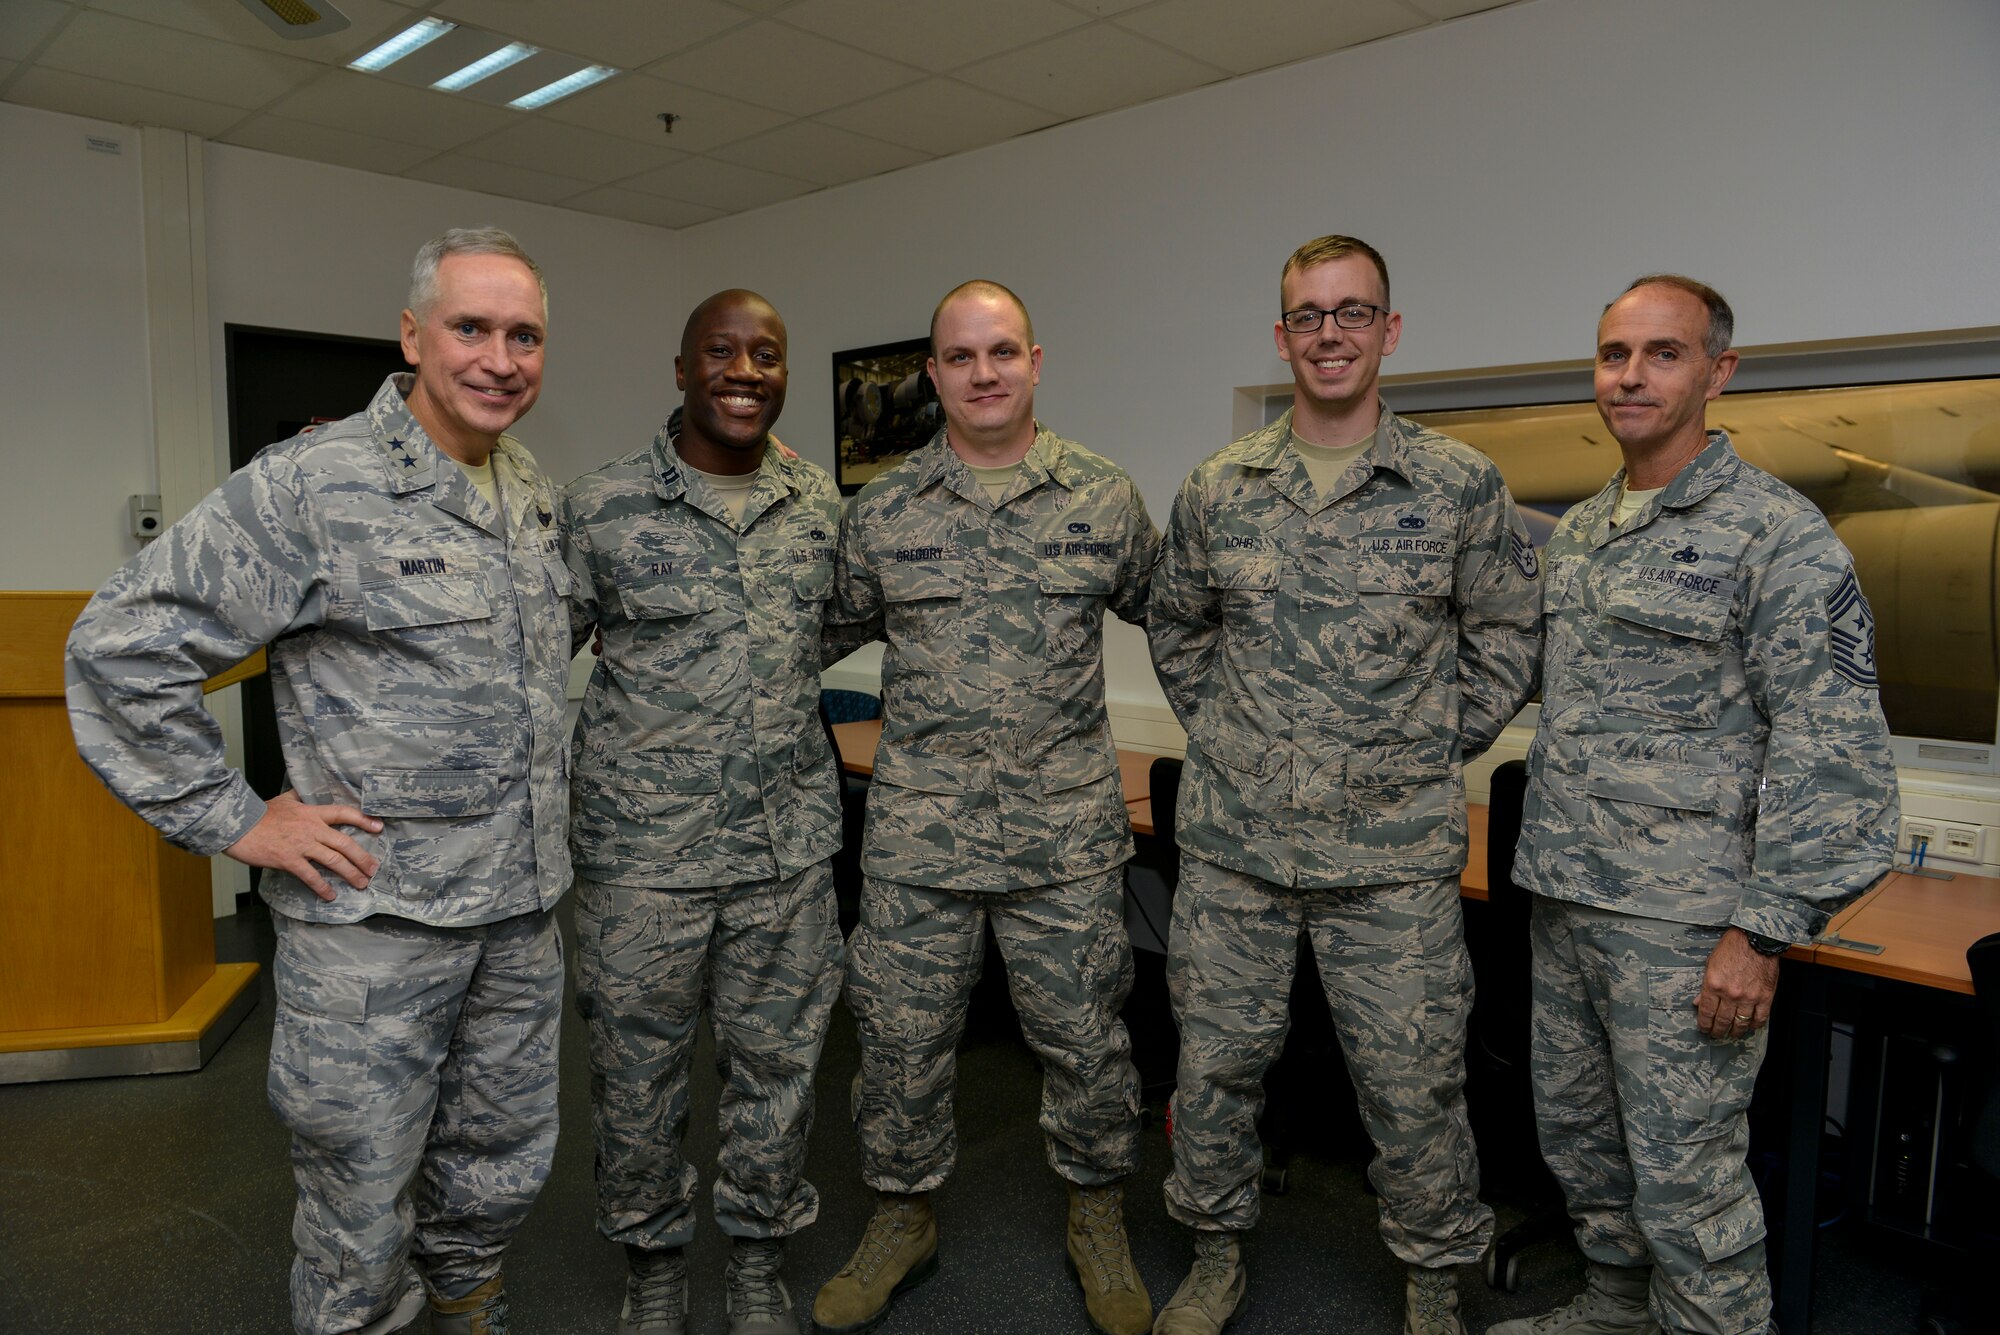 Maj. Gen. Frederick H. Rick Martin, U.S. Air Force Expeditionary Center commander, poses for a group photo with Airmen from the 721st Aircraft Maintenance Squadron Oct. 13, 2015, at Ramstein Air Base, Germany. During his visit to the 721st AMXS, superior performers from the unit explained the aircraft de-icing process and their winter execution plan. (U.S. Air Force photo/Senior Airman Nicole Sikorski)